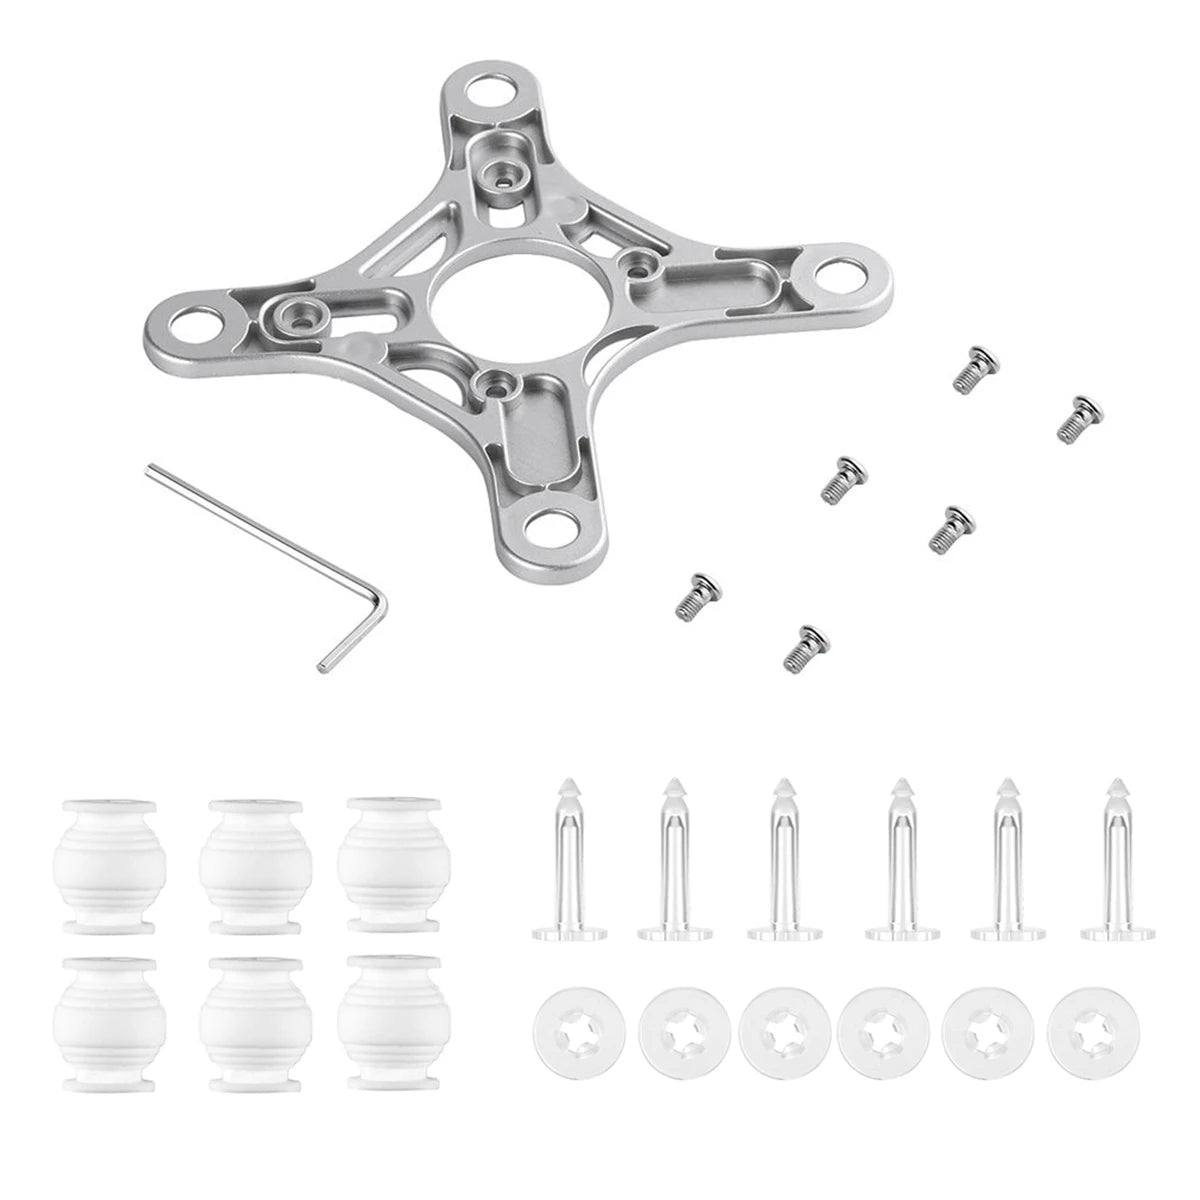 pin Locker for DJI Phantom SPECIFICATIONS include 3 : 1 pieces